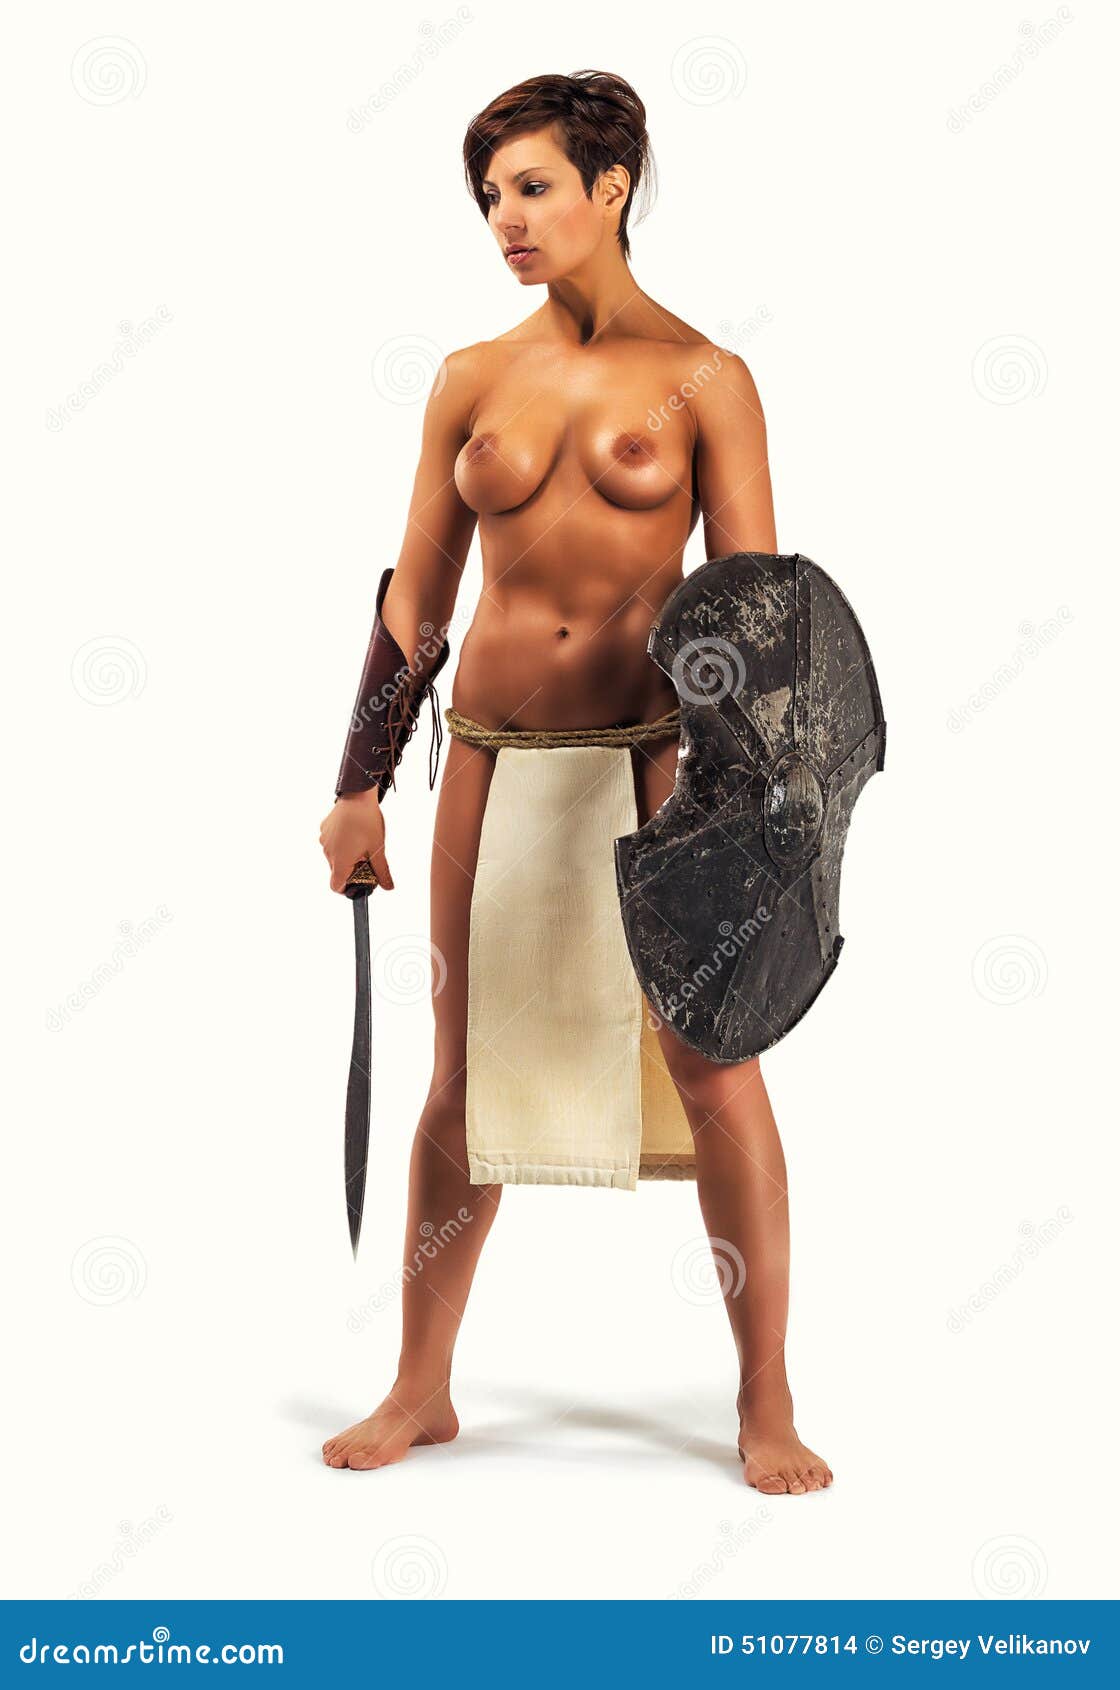 Busty nude warrior woman nackt picture